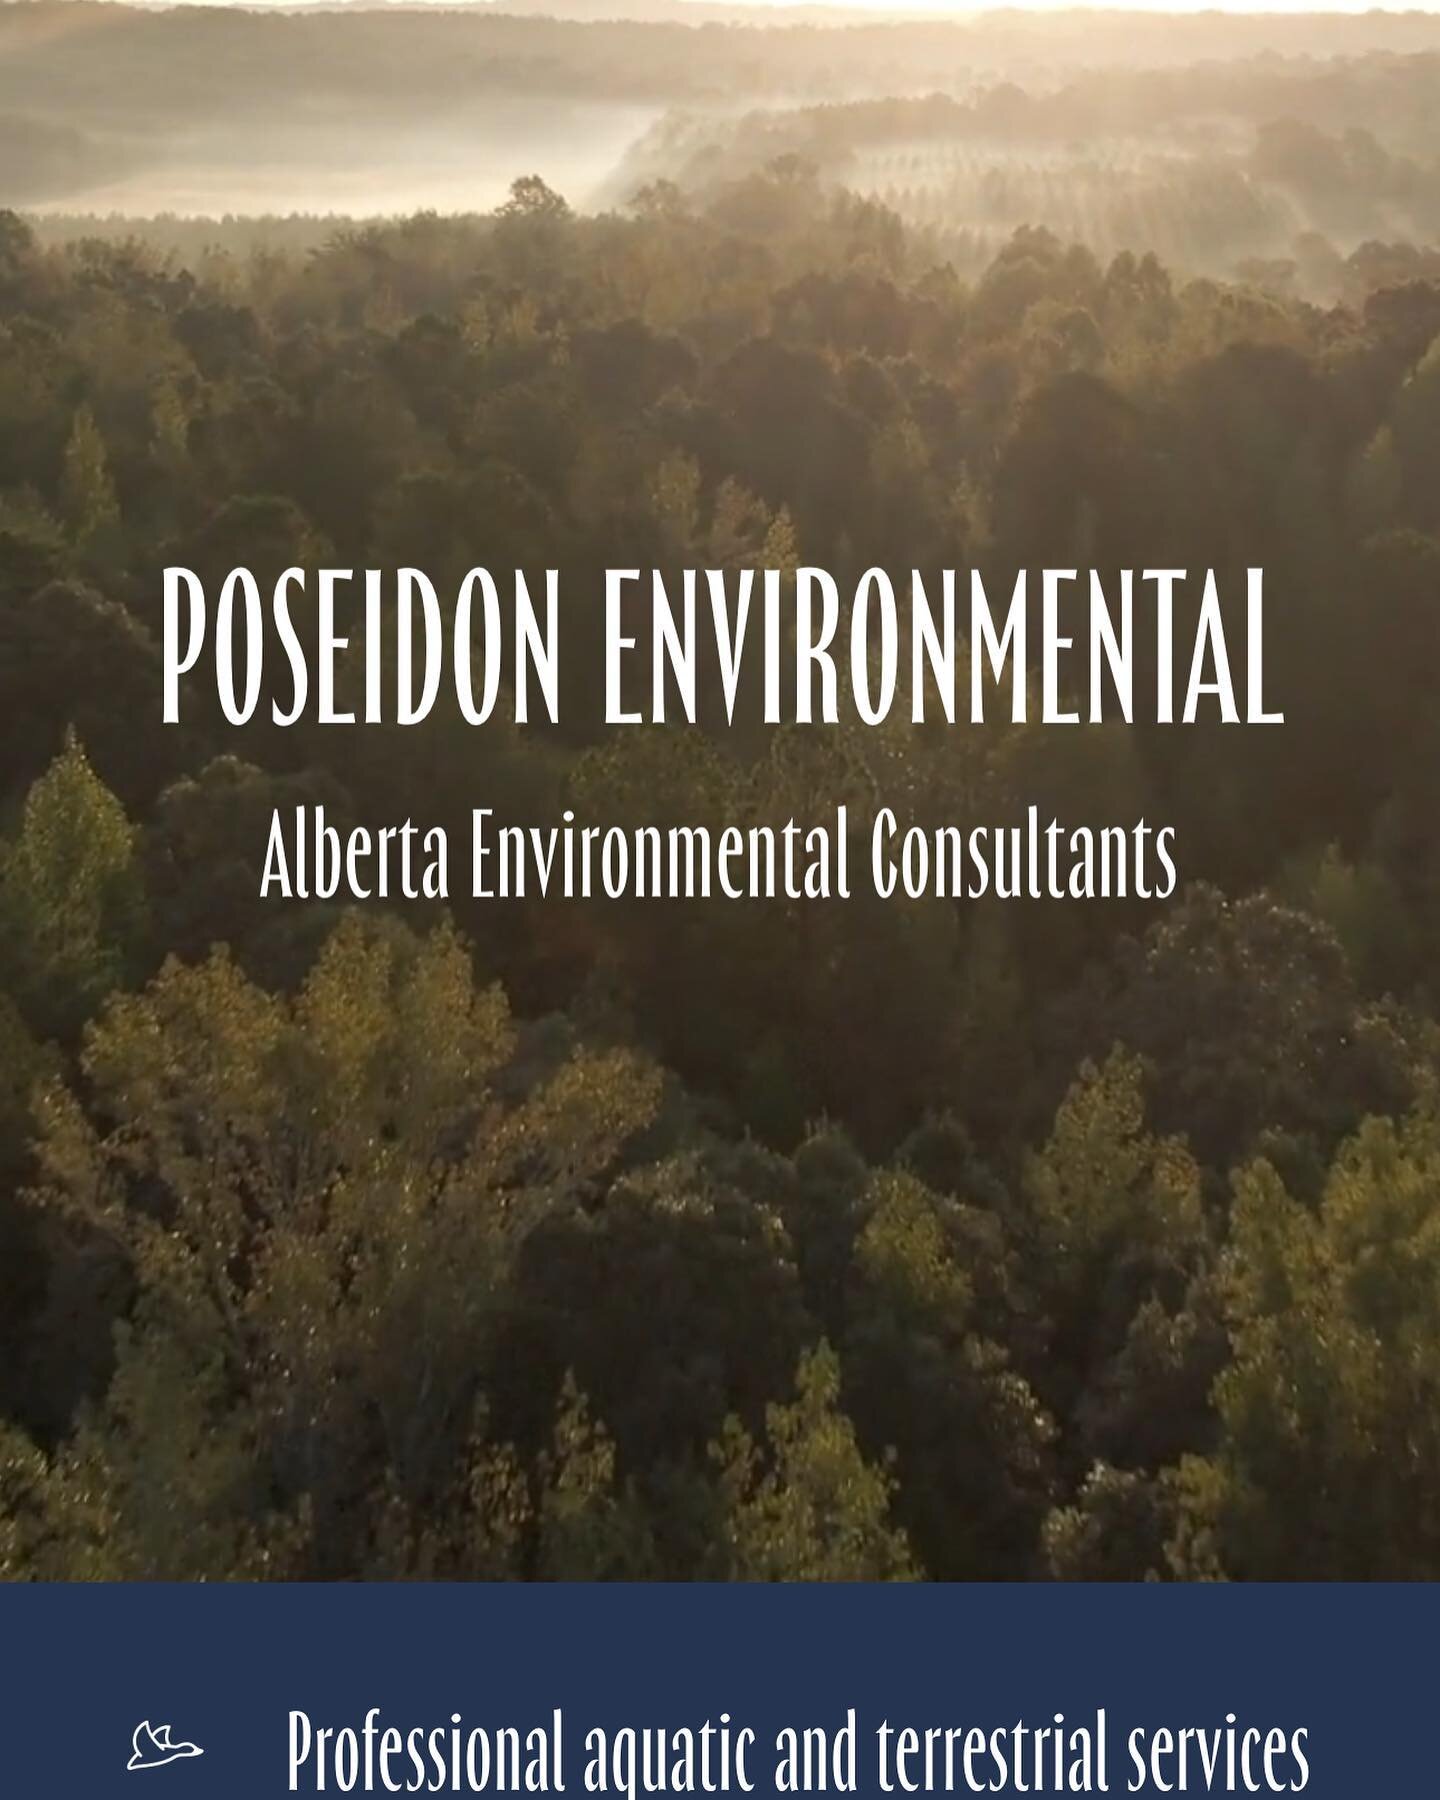 Excited to announce our new website is now live! Come check out who we are and what we do best 🌲 

poseidonenvironmental.ca